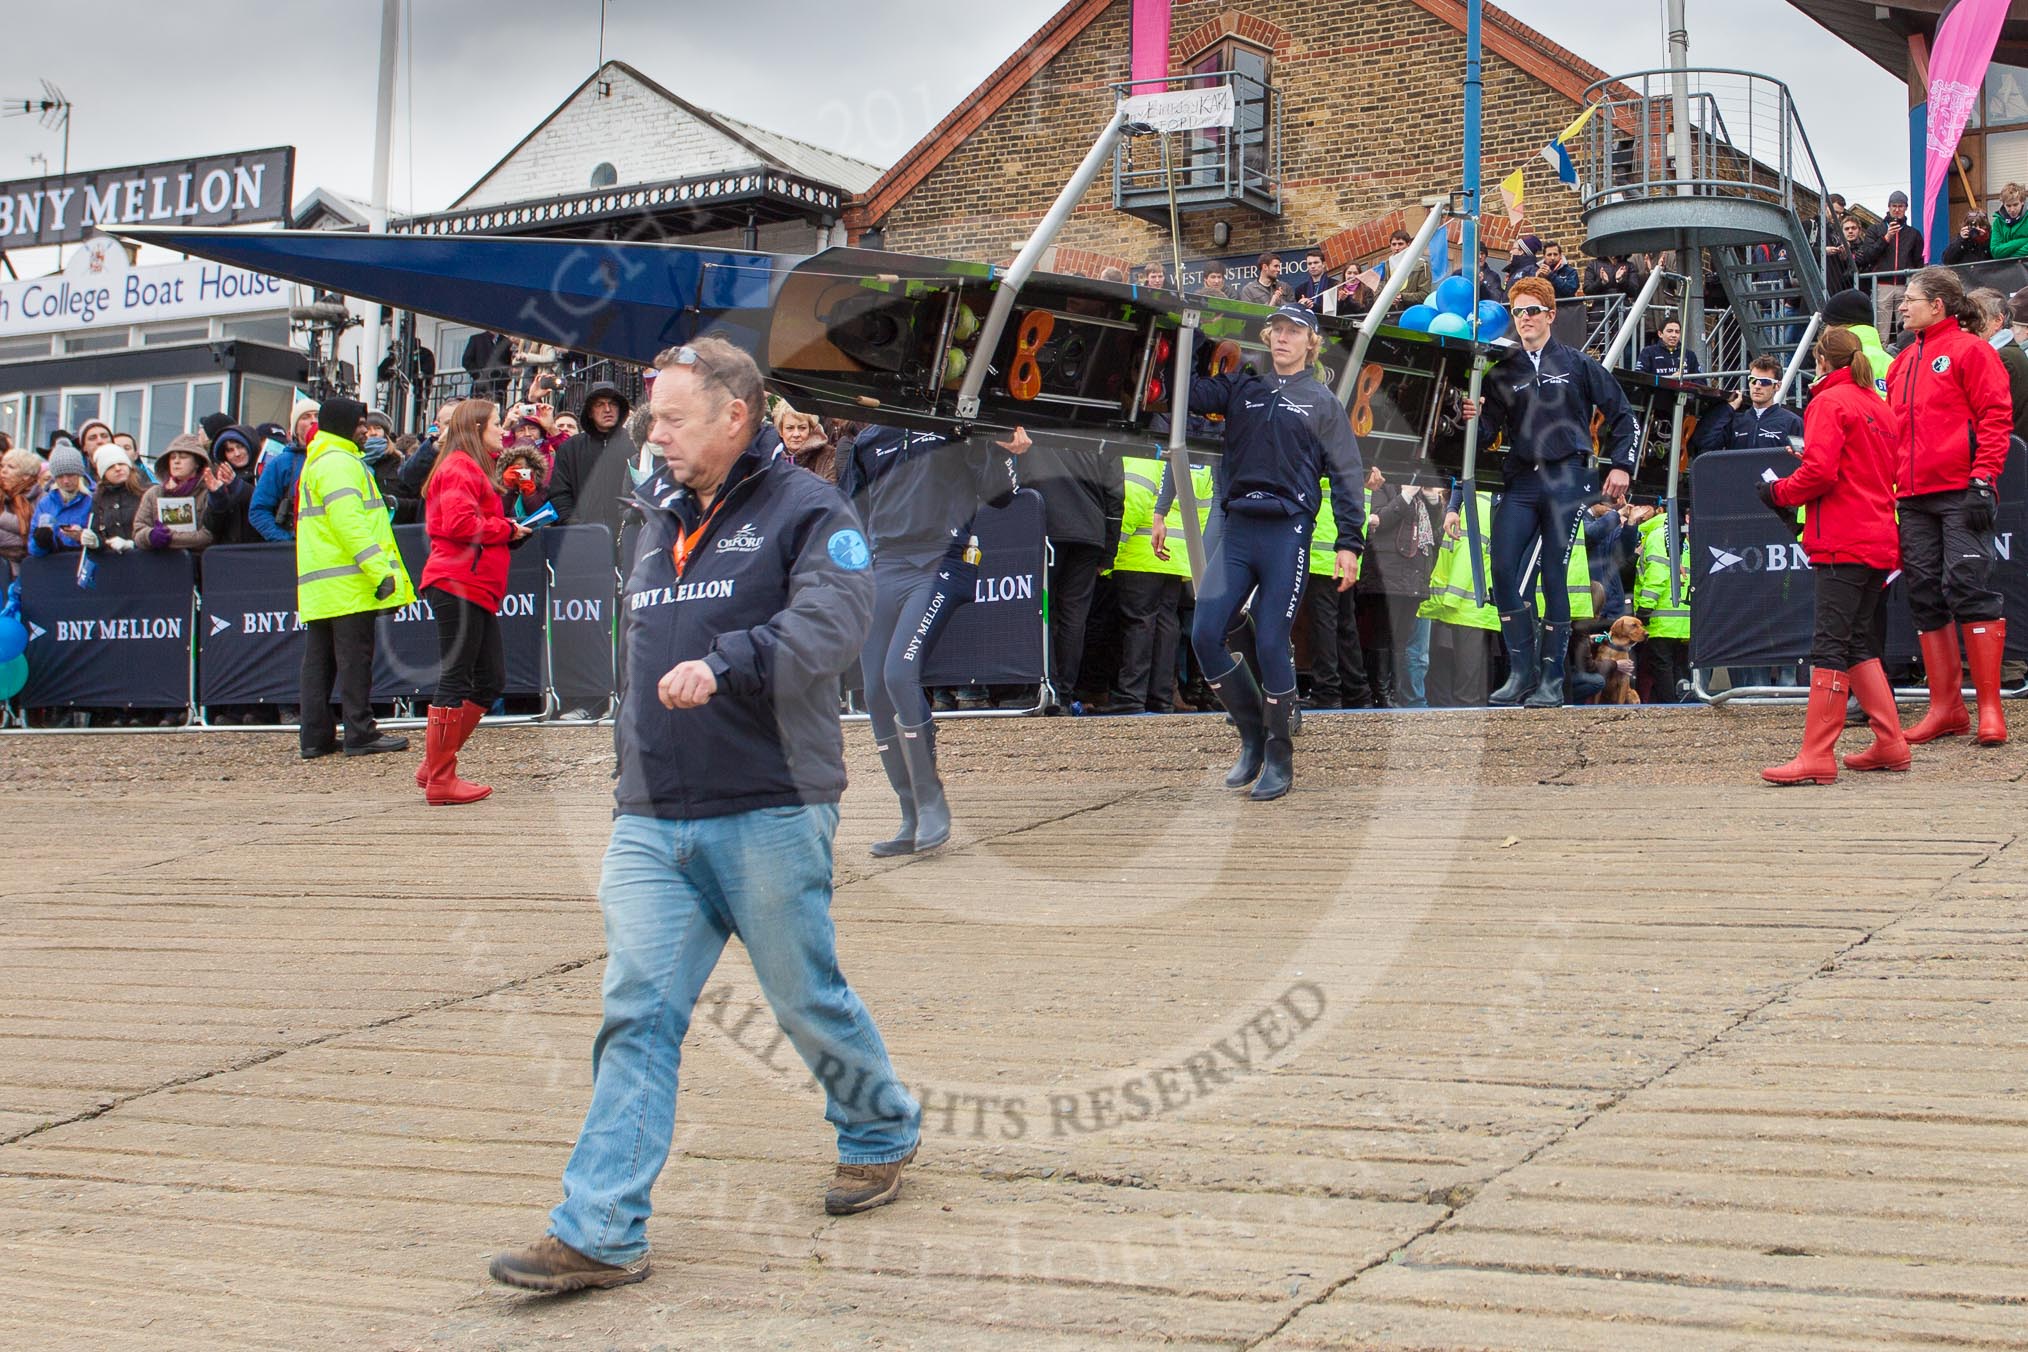 The Boat Race 2013.
Putney,
London SW15,

United Kingdom,
on 31 March 2013 at 15:14, image #106